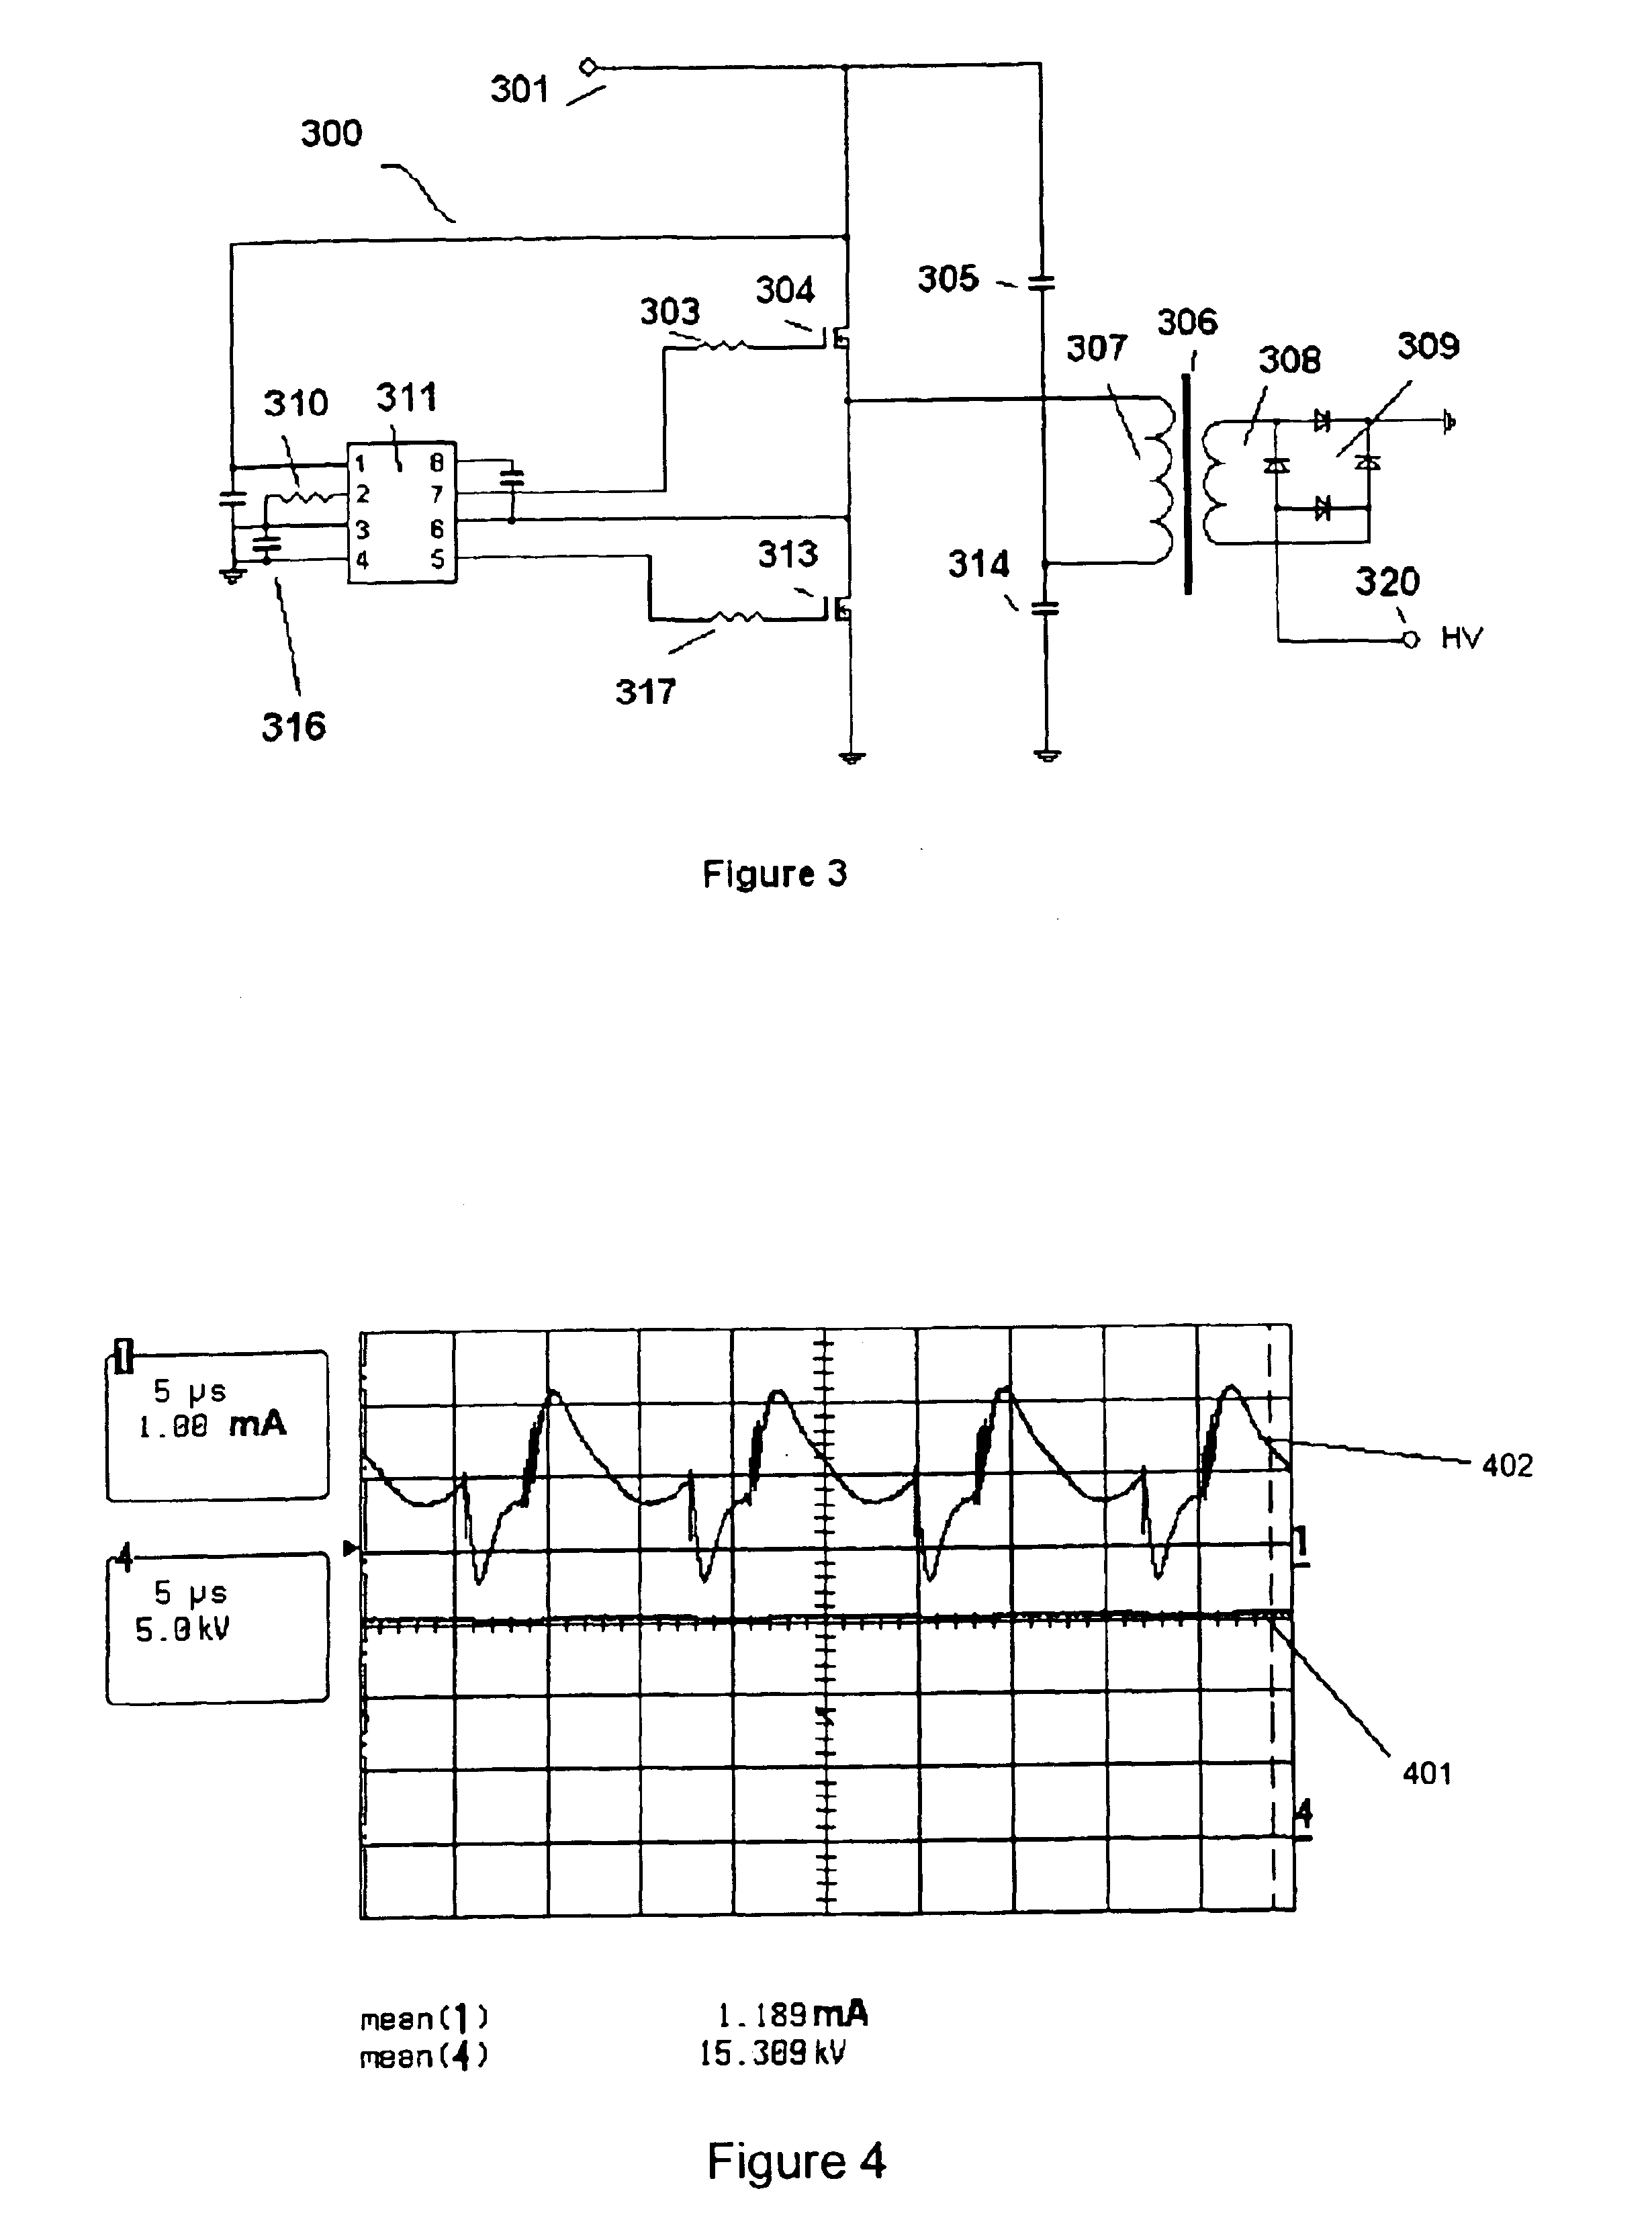 Method of and apparatus for electrostatic fluid acceleration control of a fluid flow